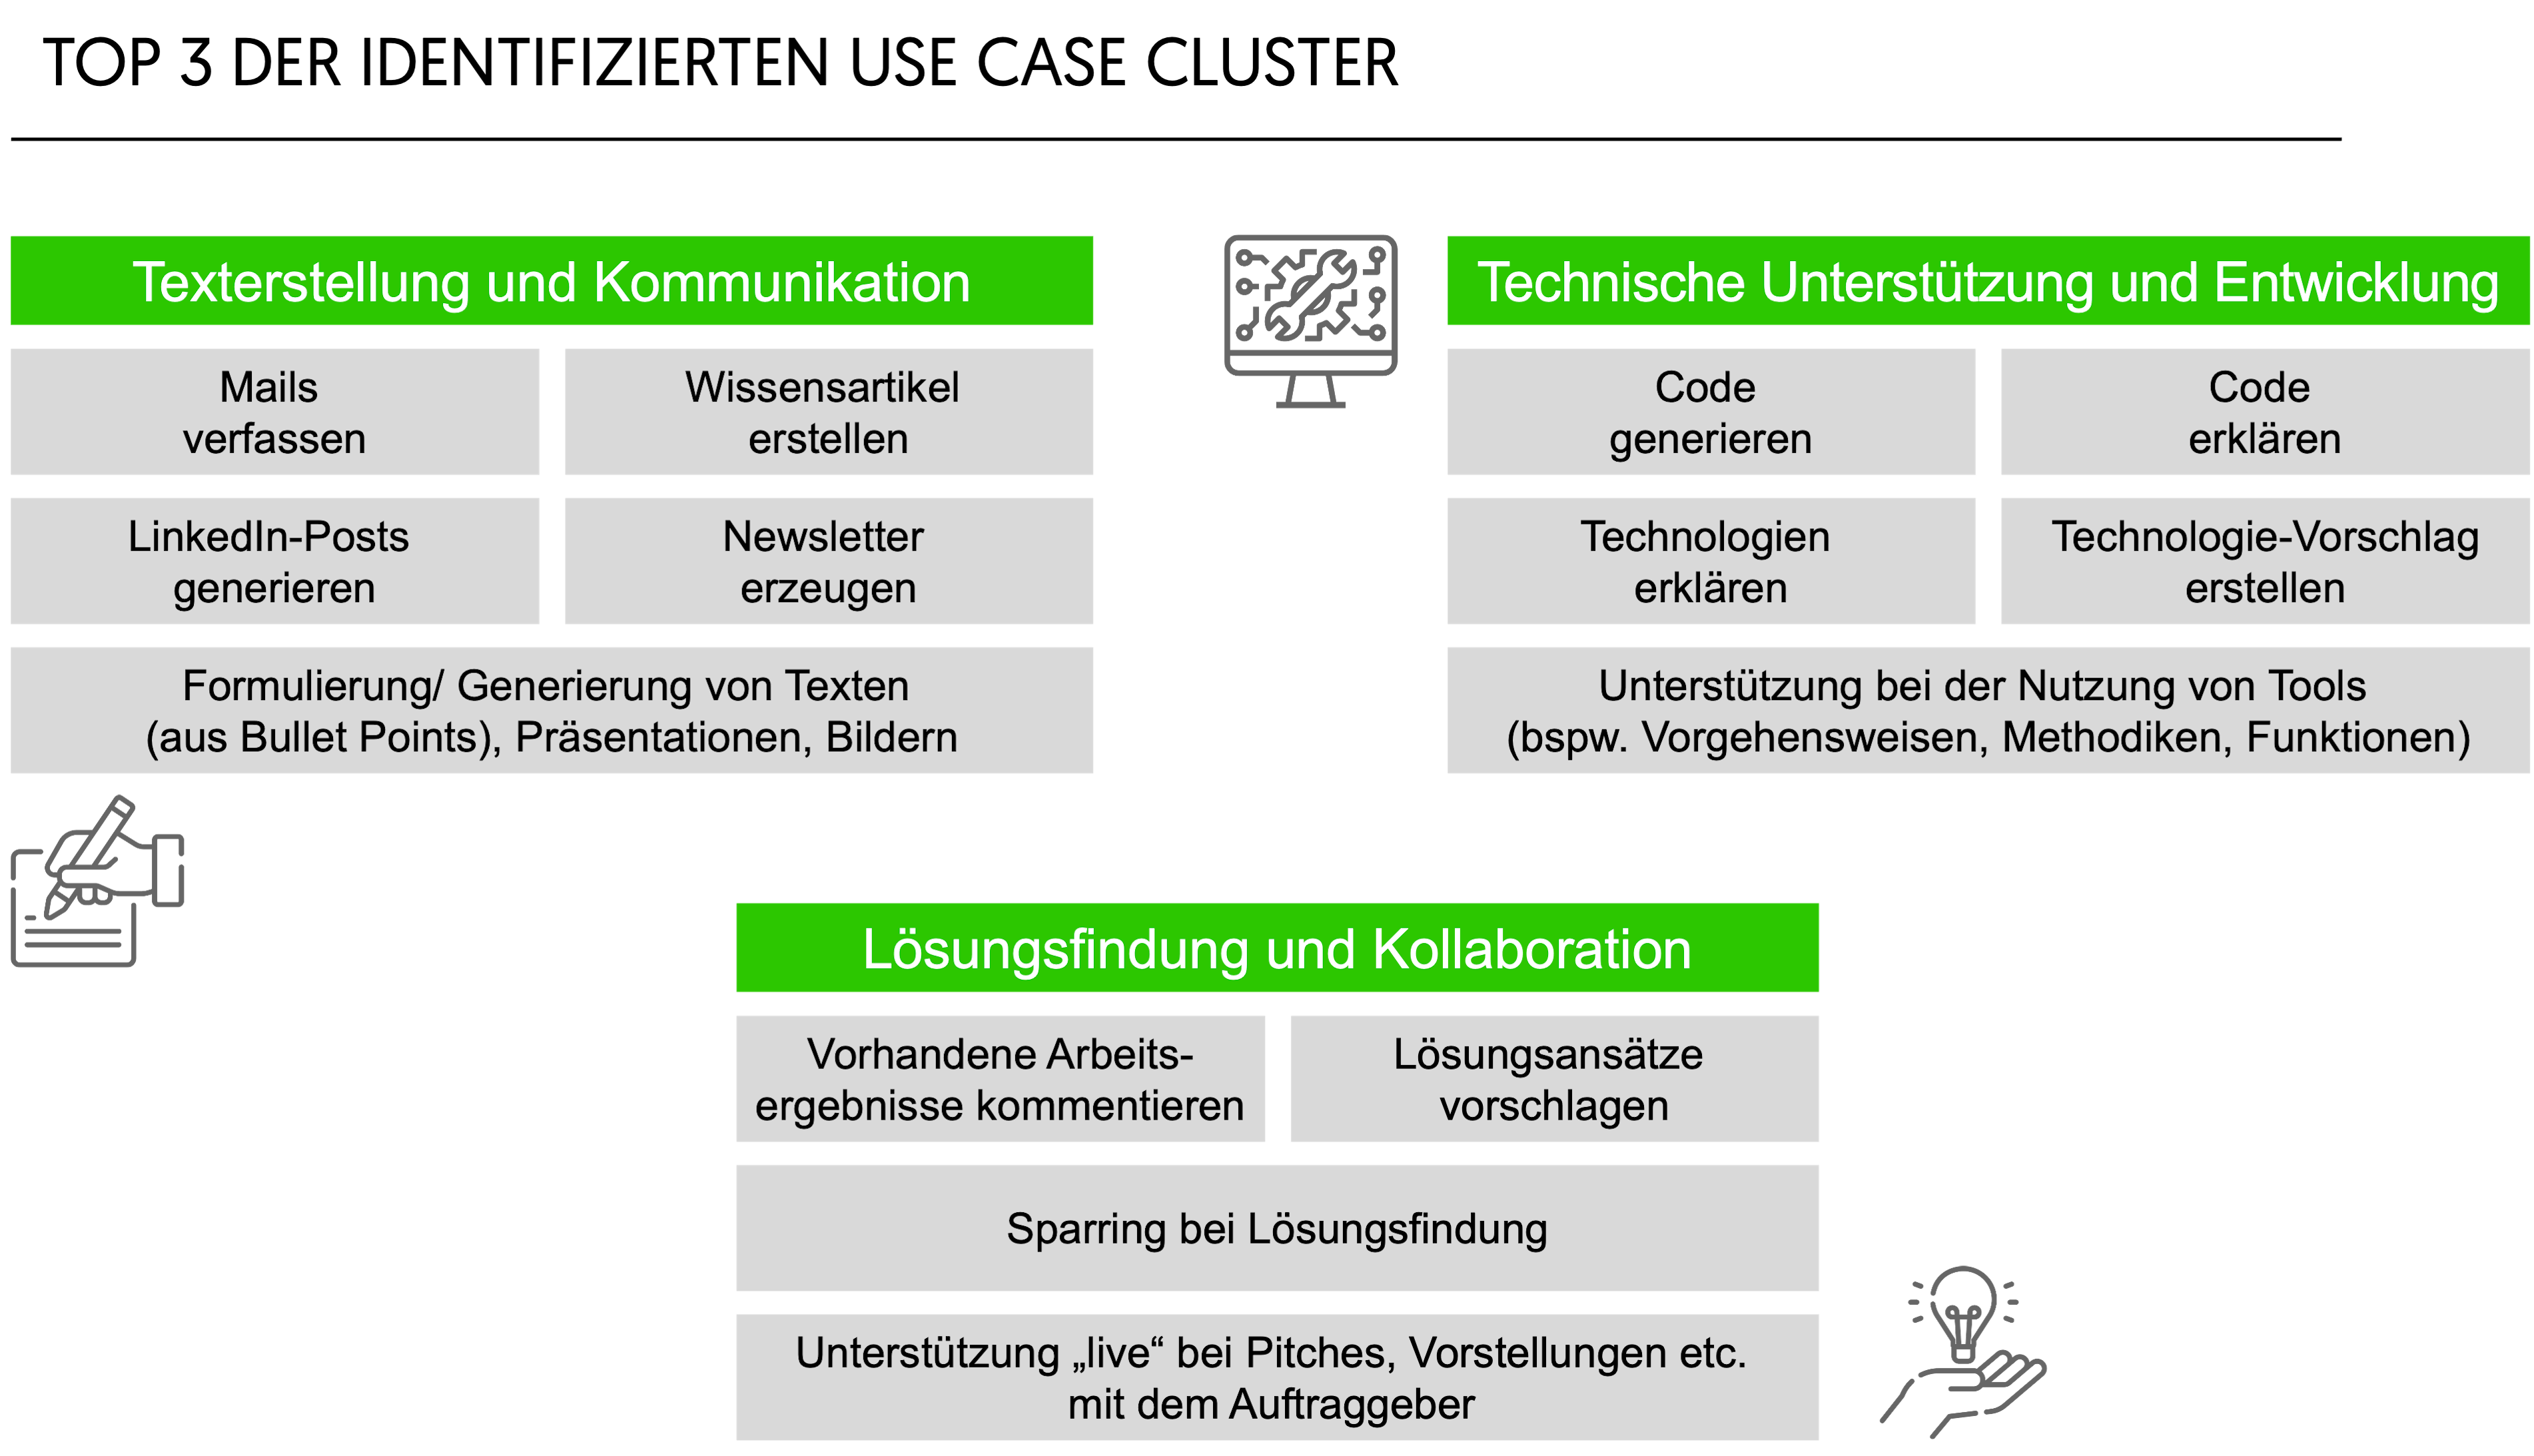 Top 3 Use Case Cluster